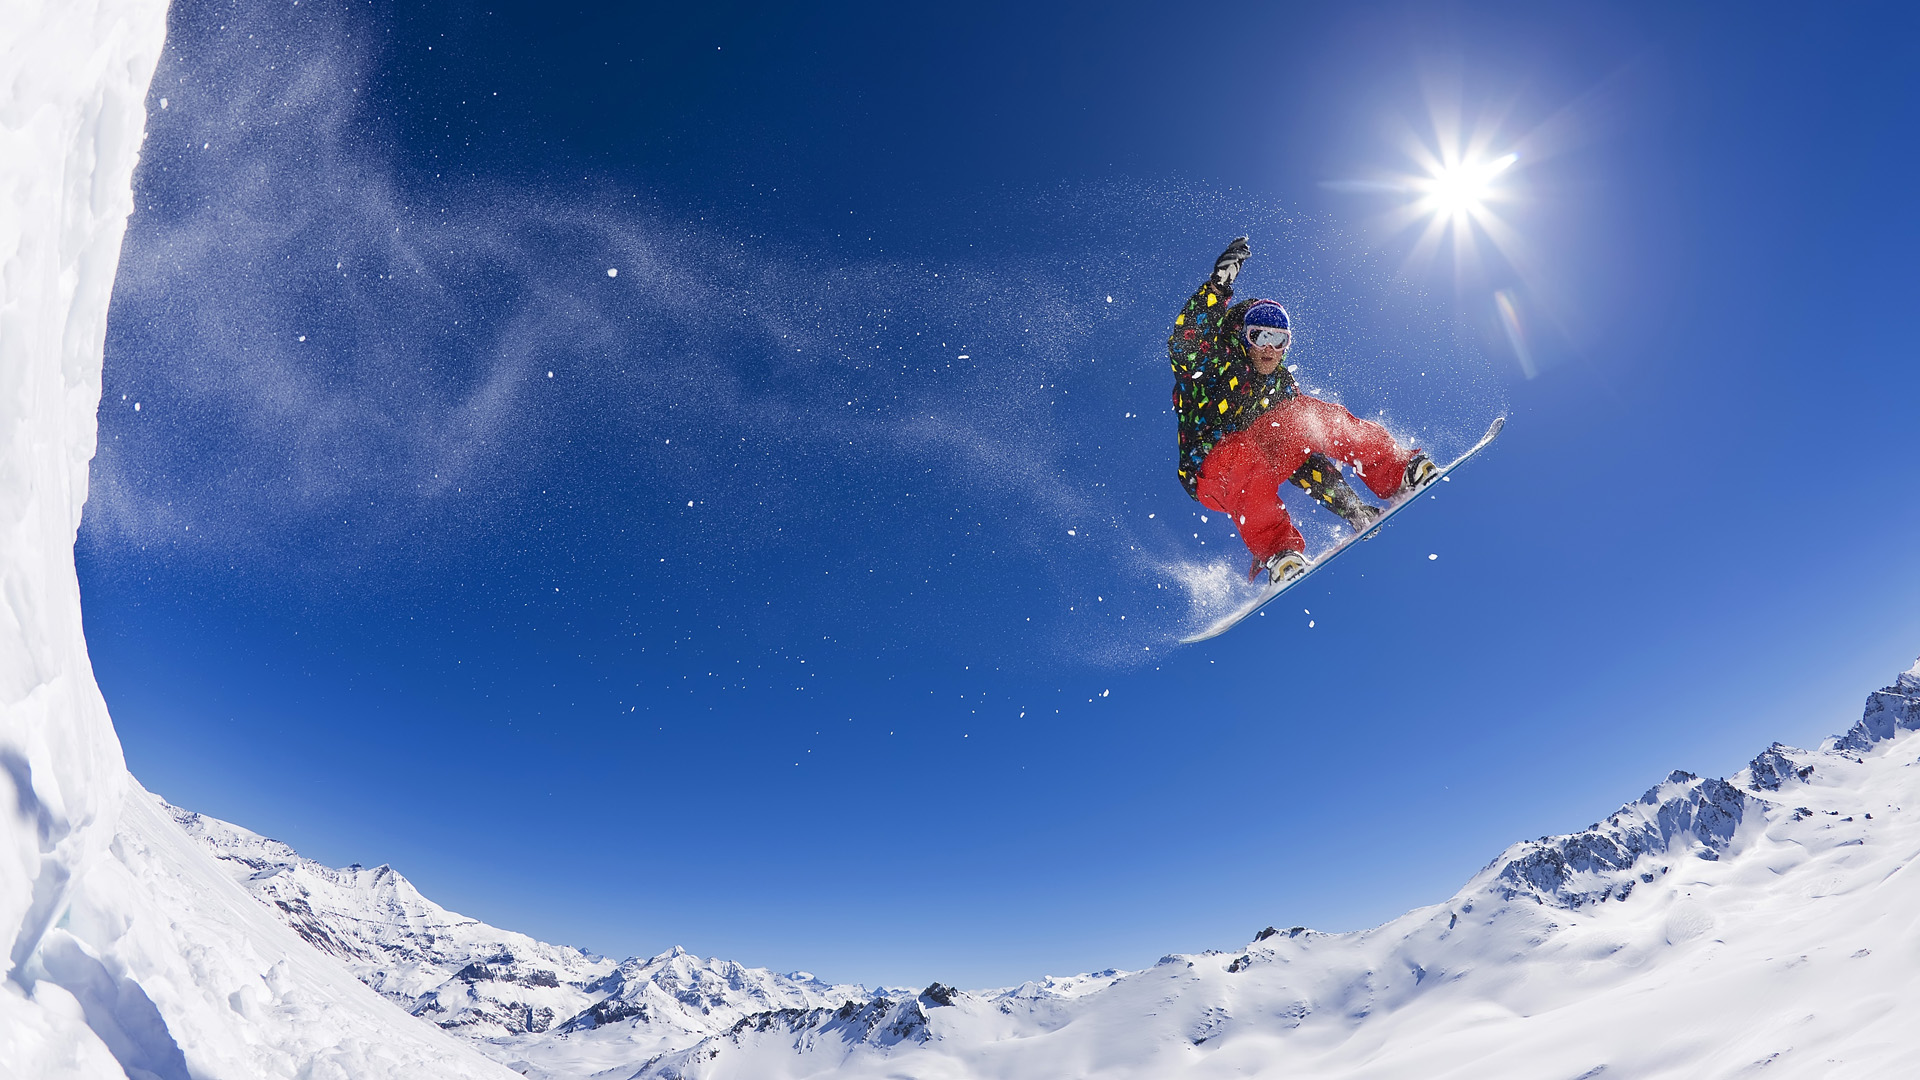 Skiing Background Wallpaper High Definition Quality